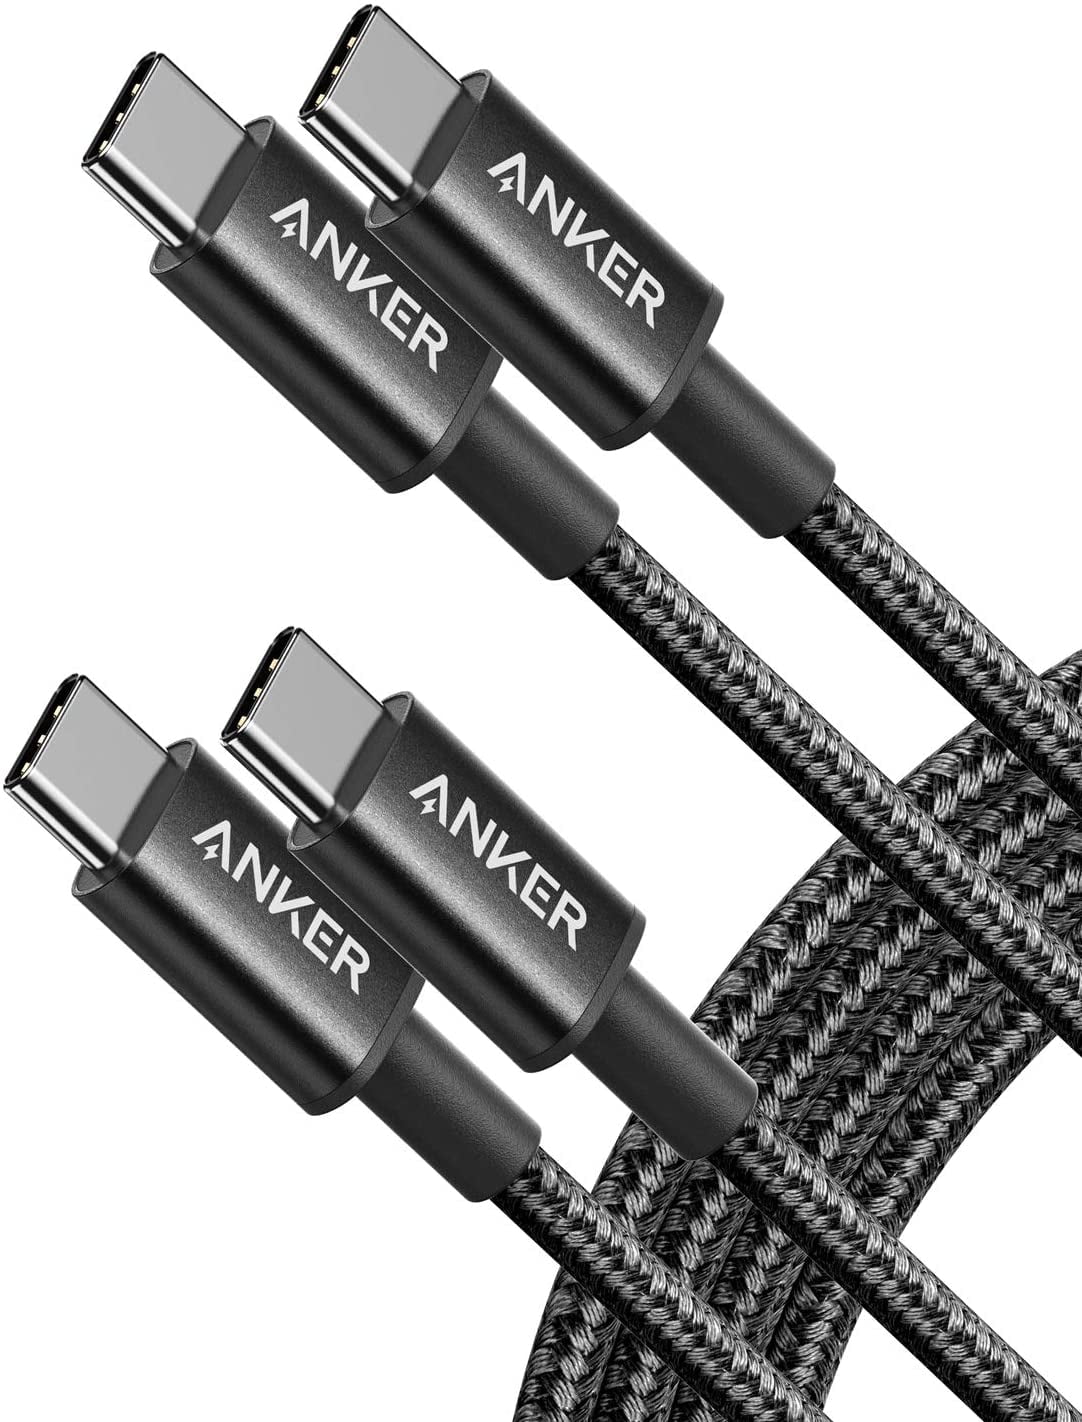 Anker USB C Cable, [2 Pack, 3ft] 310 USB A to USB C/USB A to Type C Charger  Cable Fast Charging for Samsung Galaxy Note 10 Note 9/S10+ S10, LG V30